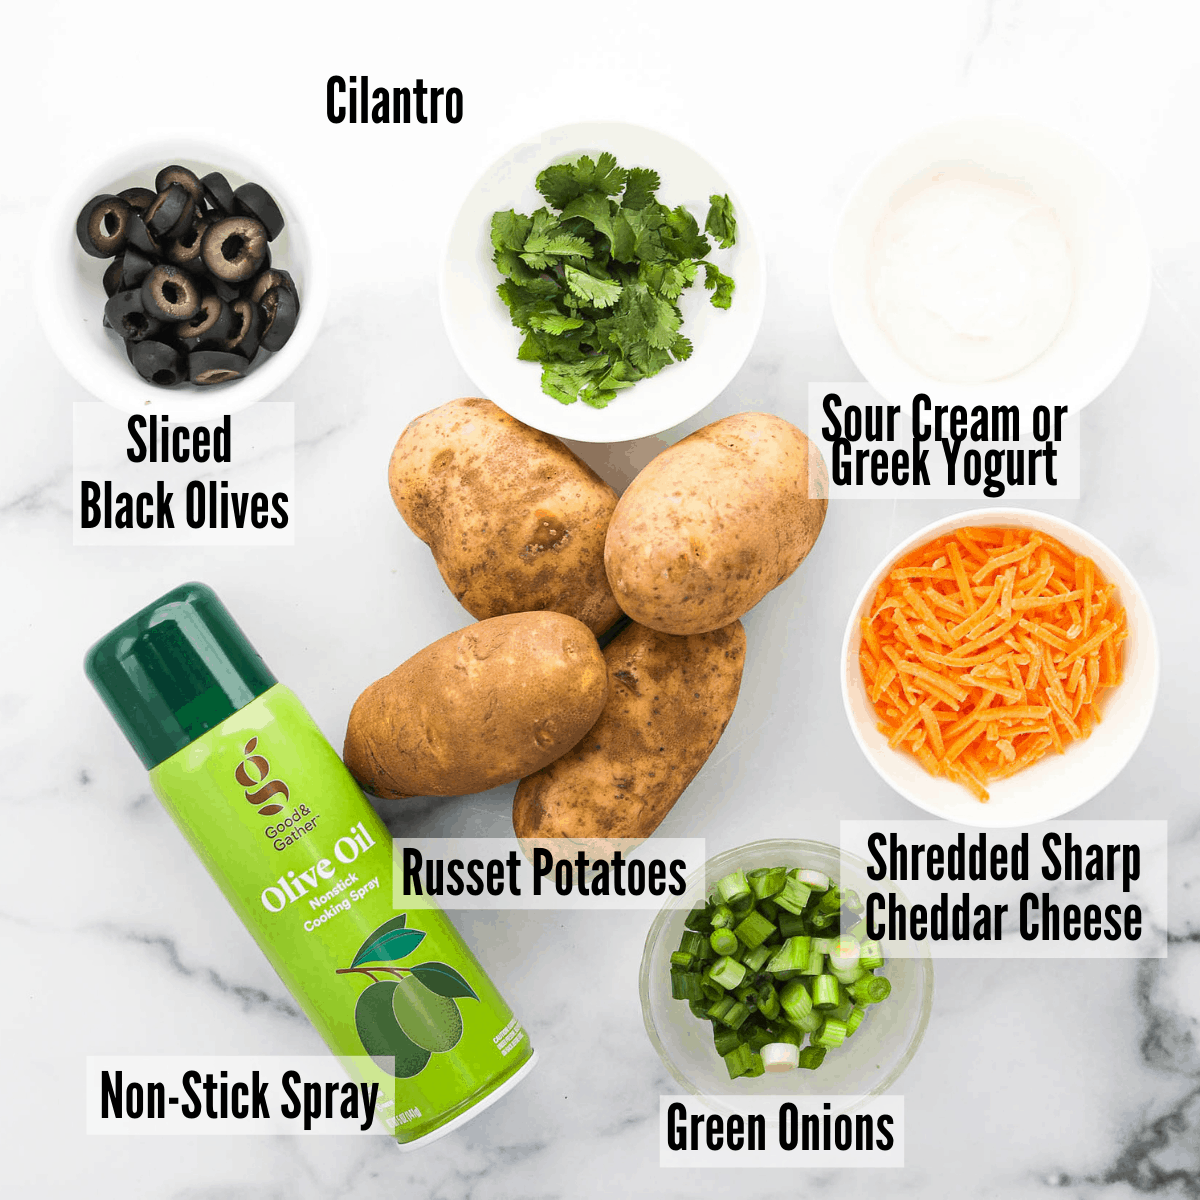 All of the ingredients for air fryer potato skins: russet potatoes, sliced black olives, cilantro, sour cream and greek yogurt, shredded sharp cheddar cheese, non-stick spray, and green onions